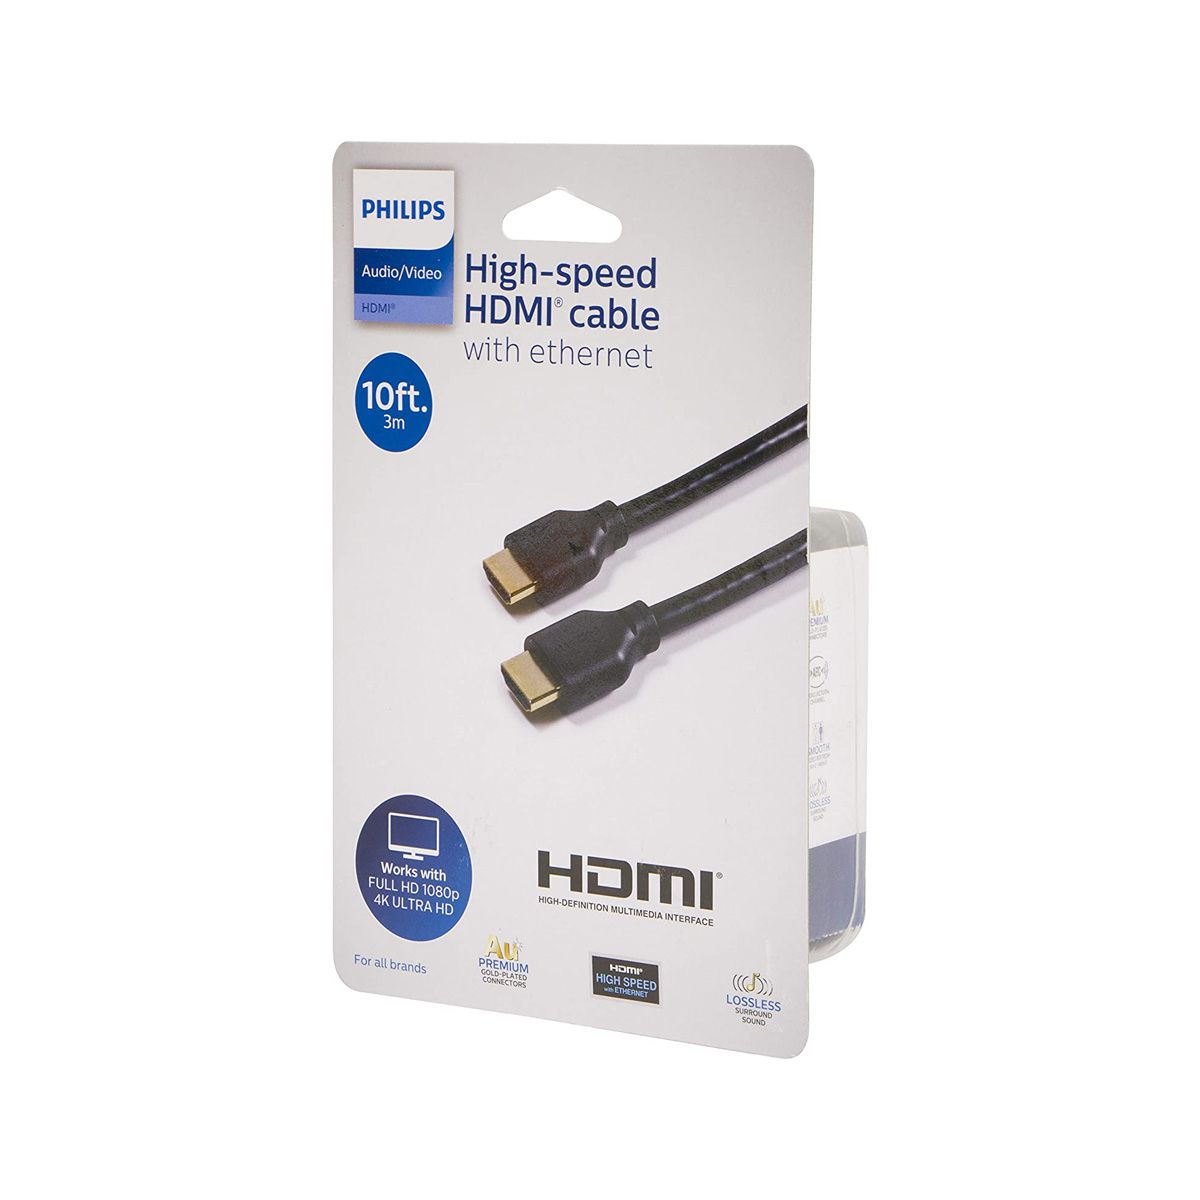 PHILIPS ULTRA HIGH-SPEED HDMI CABLE 3M